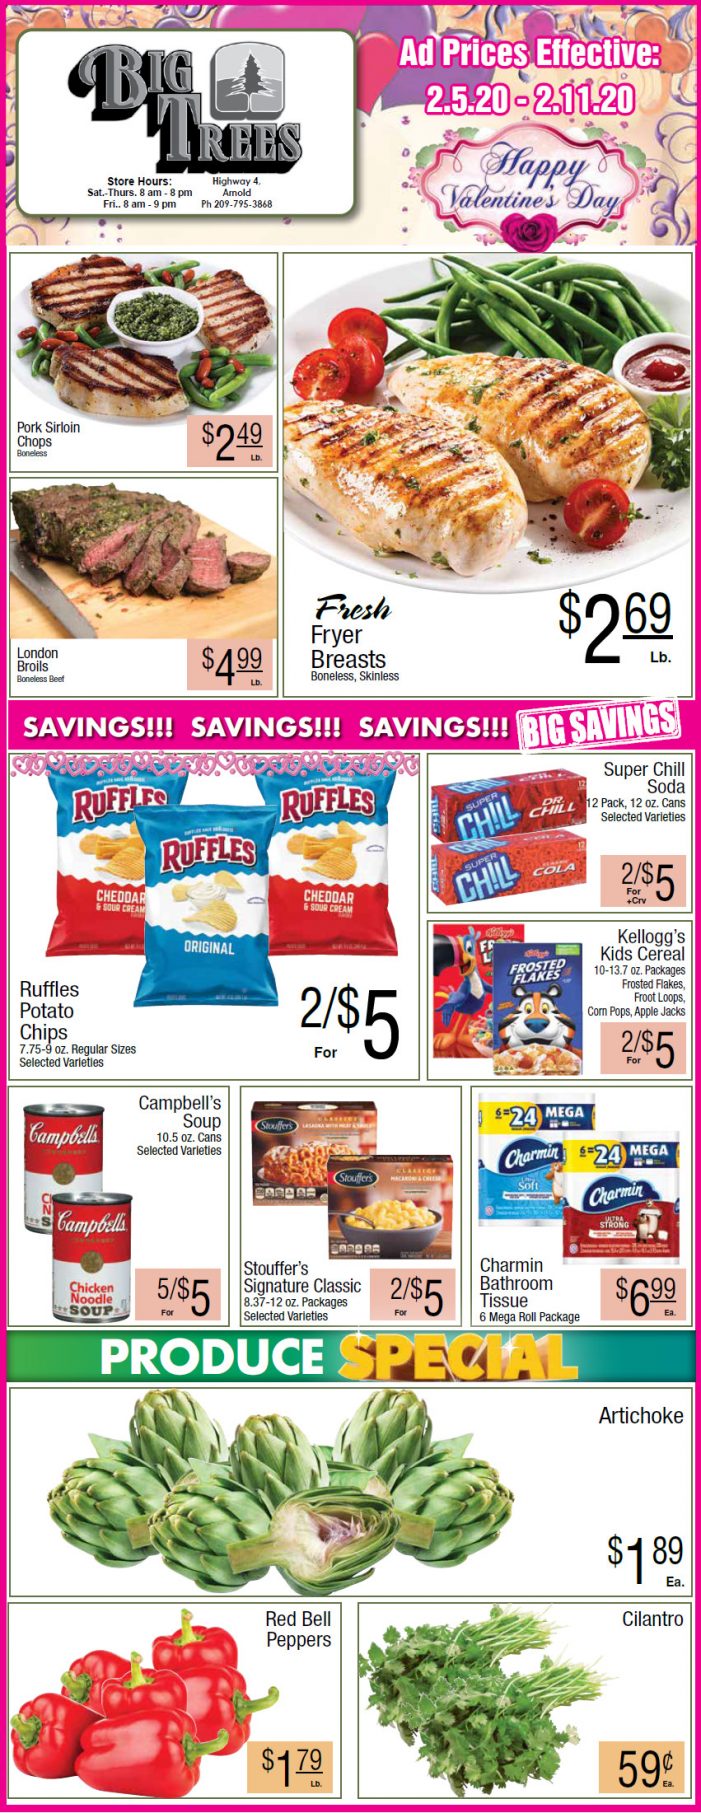 Big Tress Market Weekly Ad & Grocery Specials Through February 11th